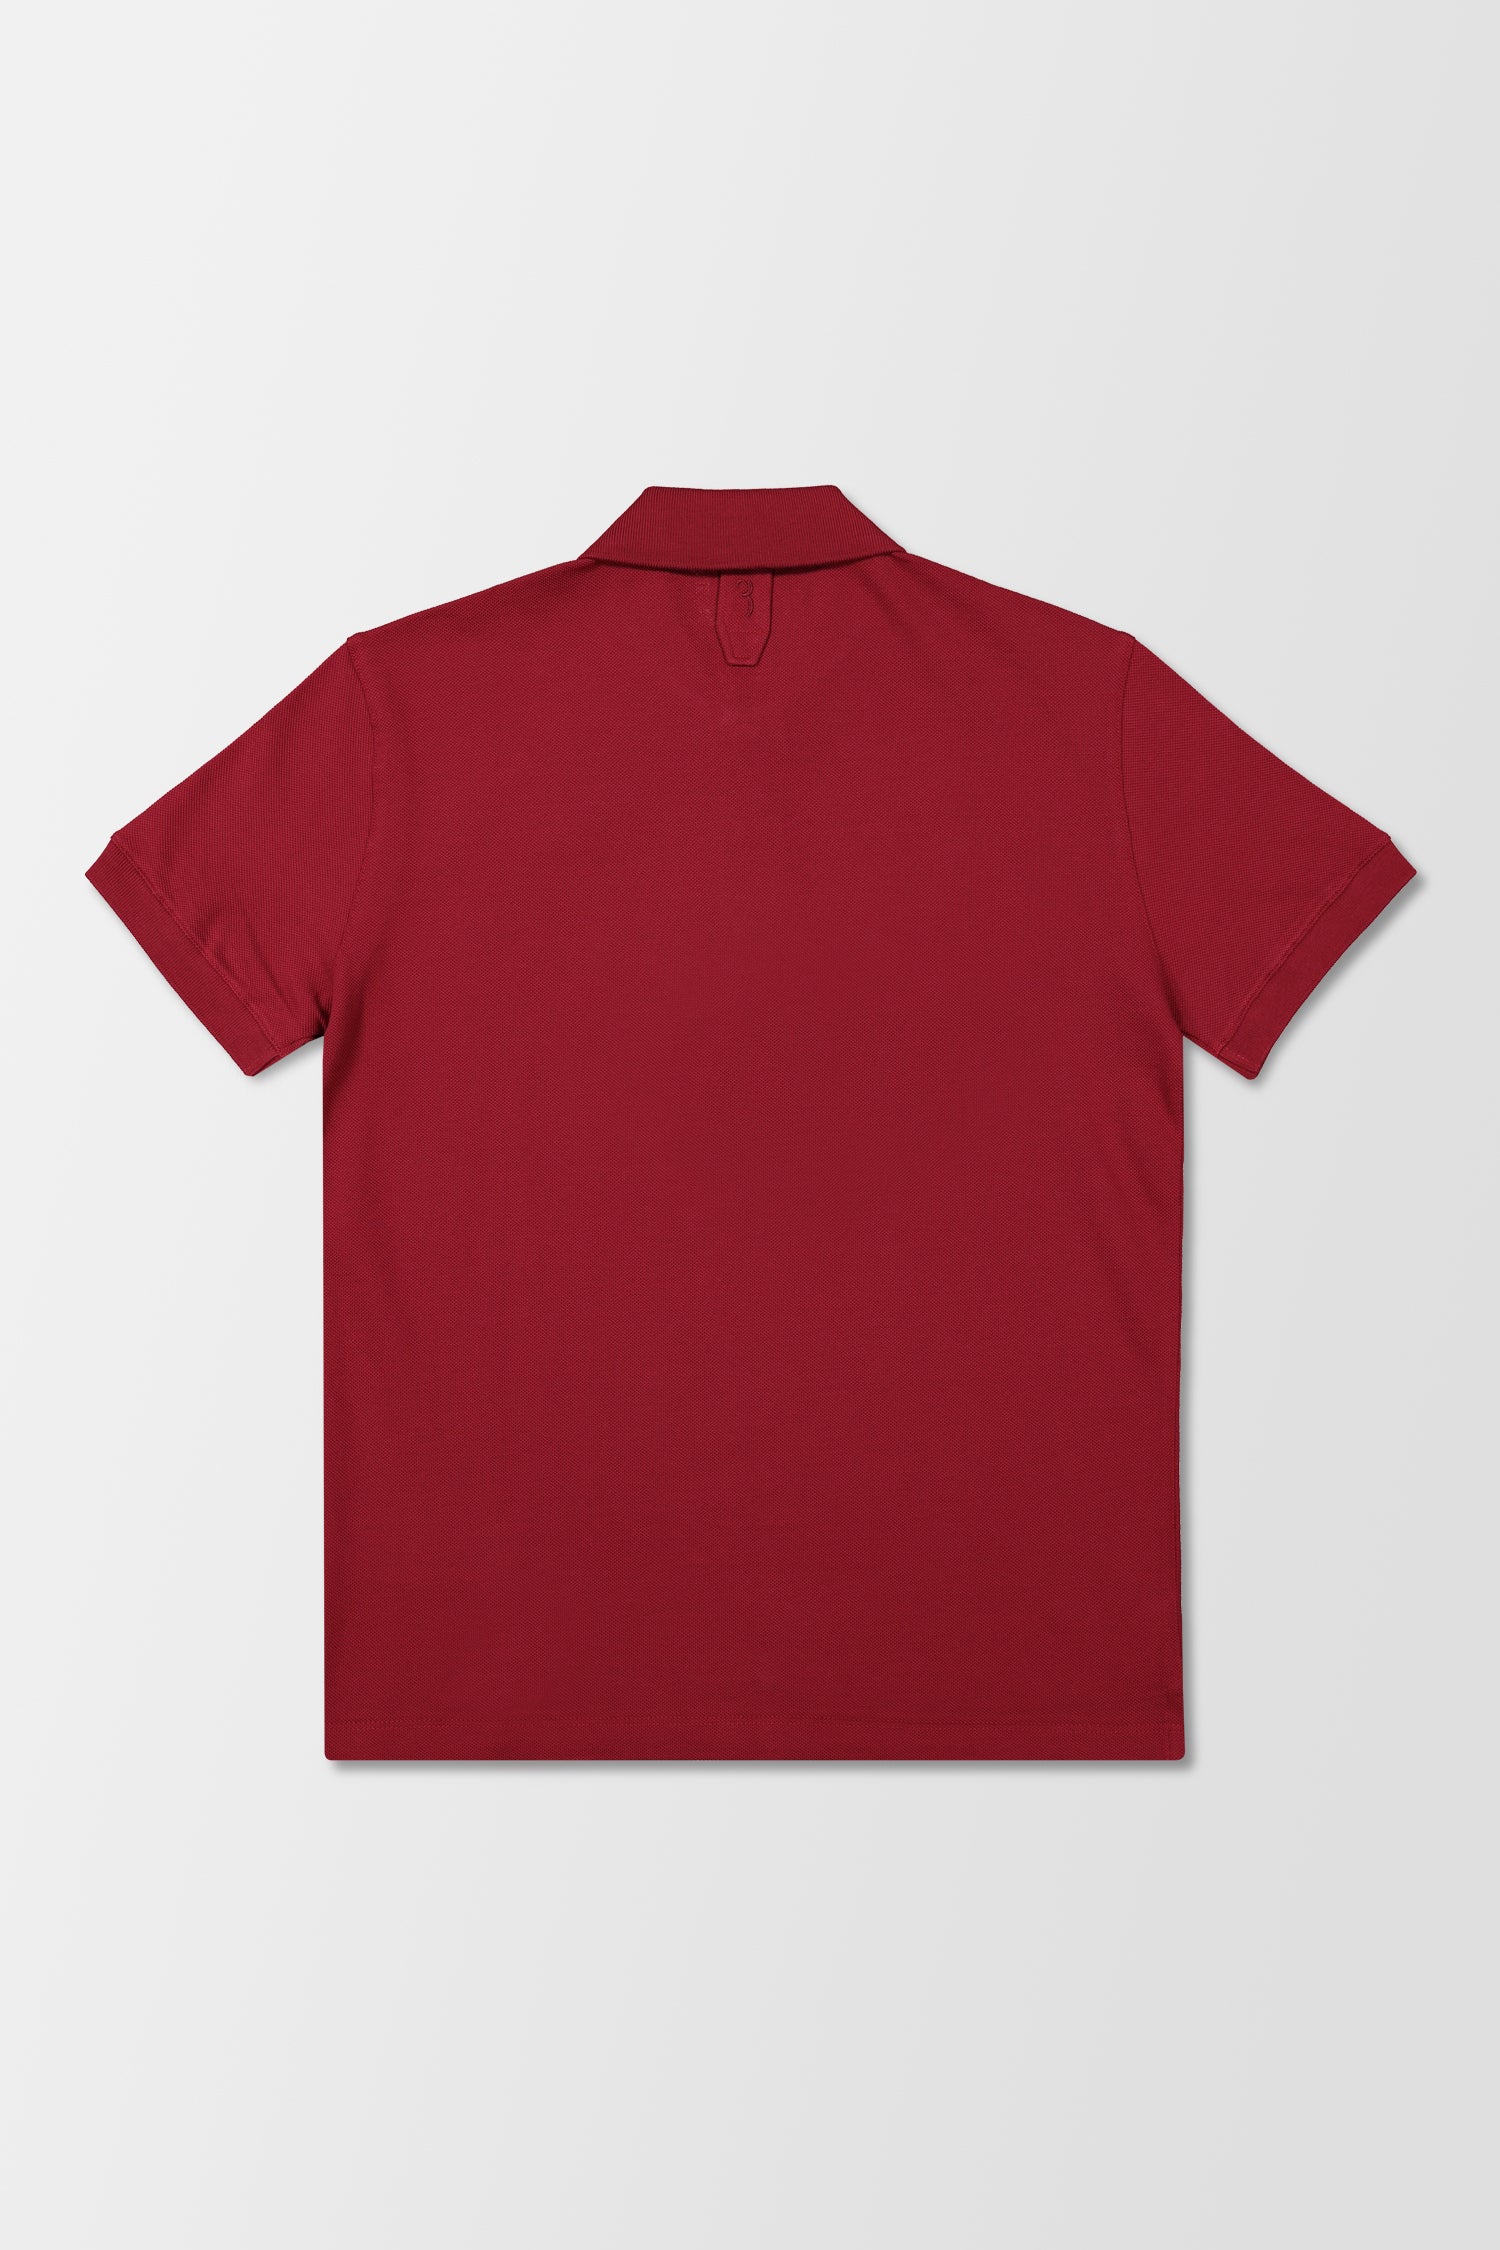 Billionaire Red SS Members Only Polo